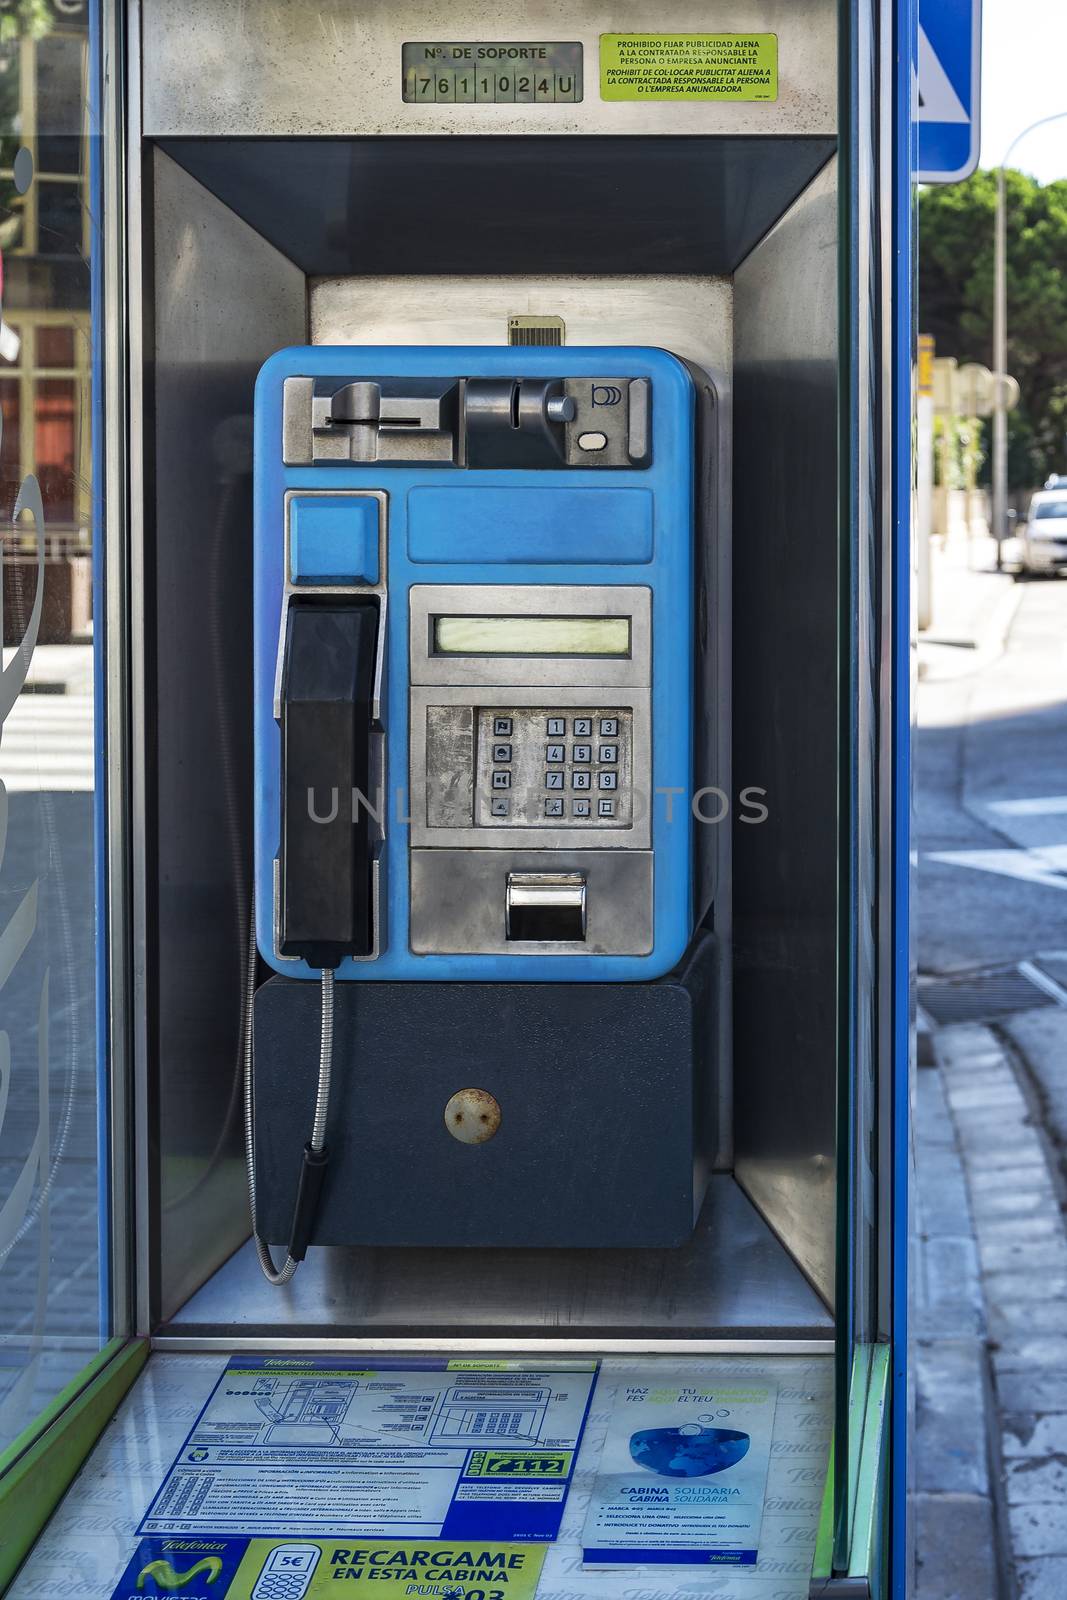 Payphone for city and long-distance calls (Blanes, Spain) by Grommik